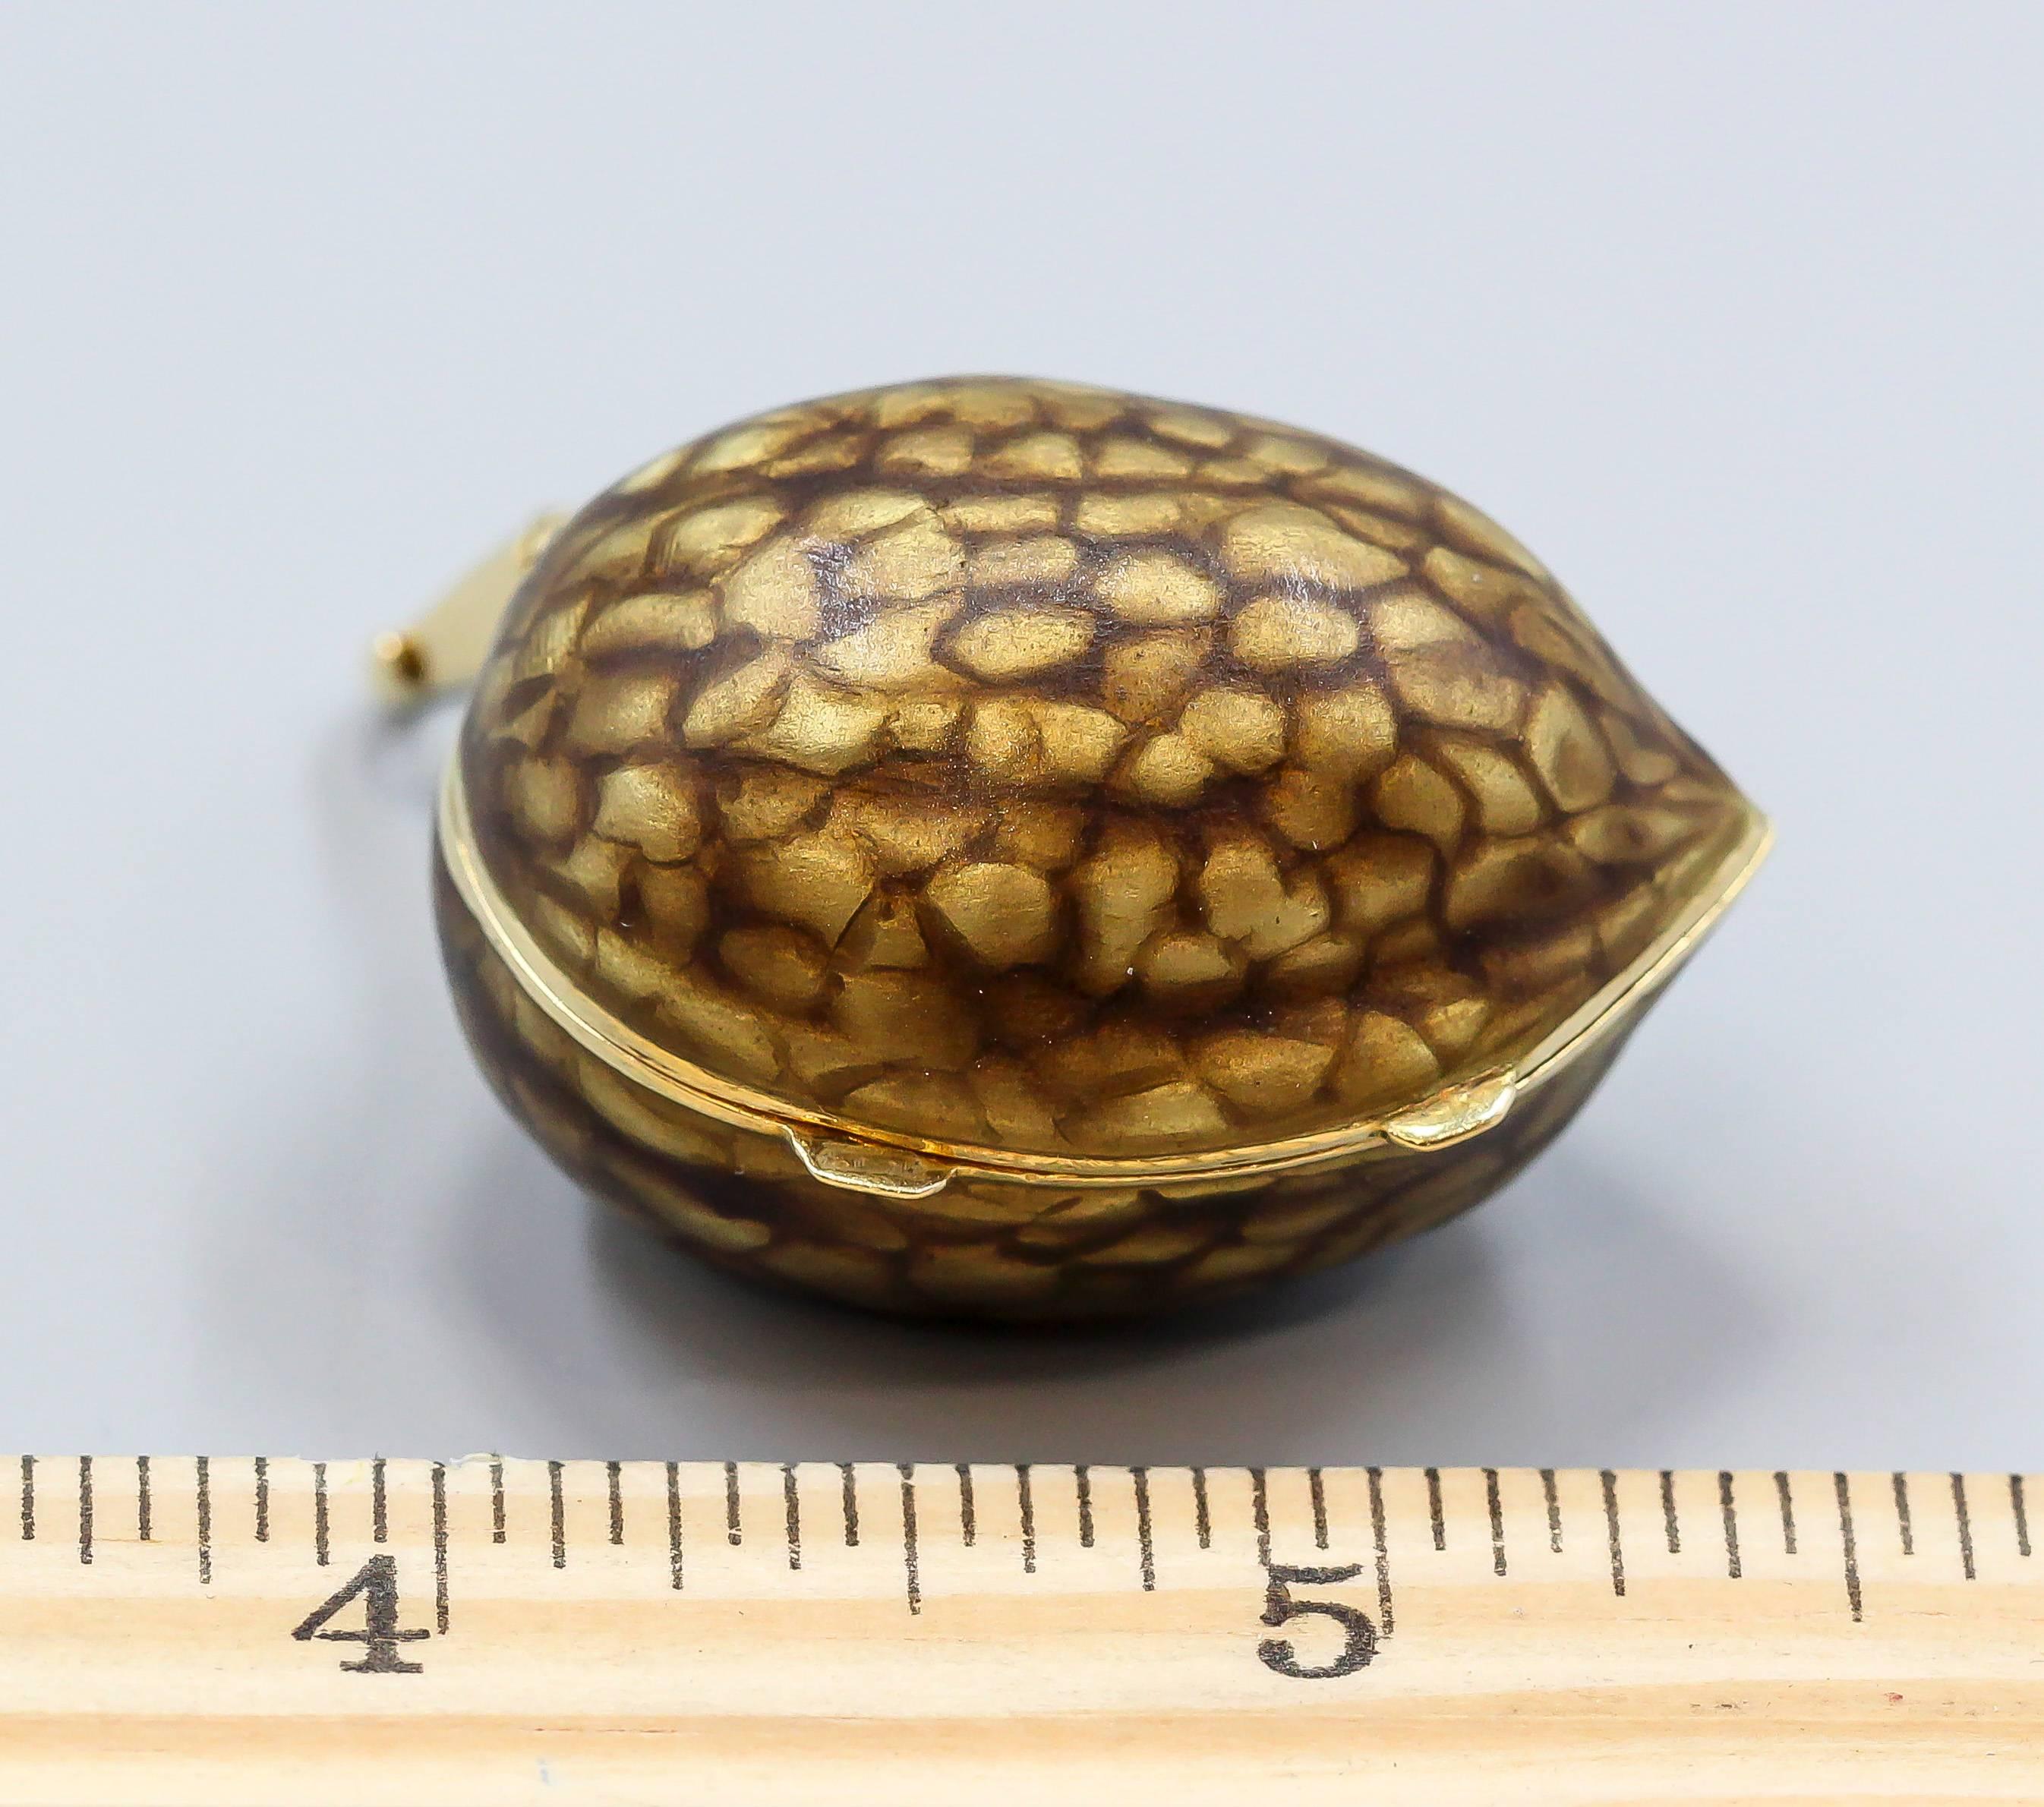 Unusual 18K yellow gold and enamel pill box with bale of Italian origin. It is in the shape of a walnut, with great attention to detail to make it look realistic. Comes with an 18K gold bale to attach it as a pendant or charm. High quality make and